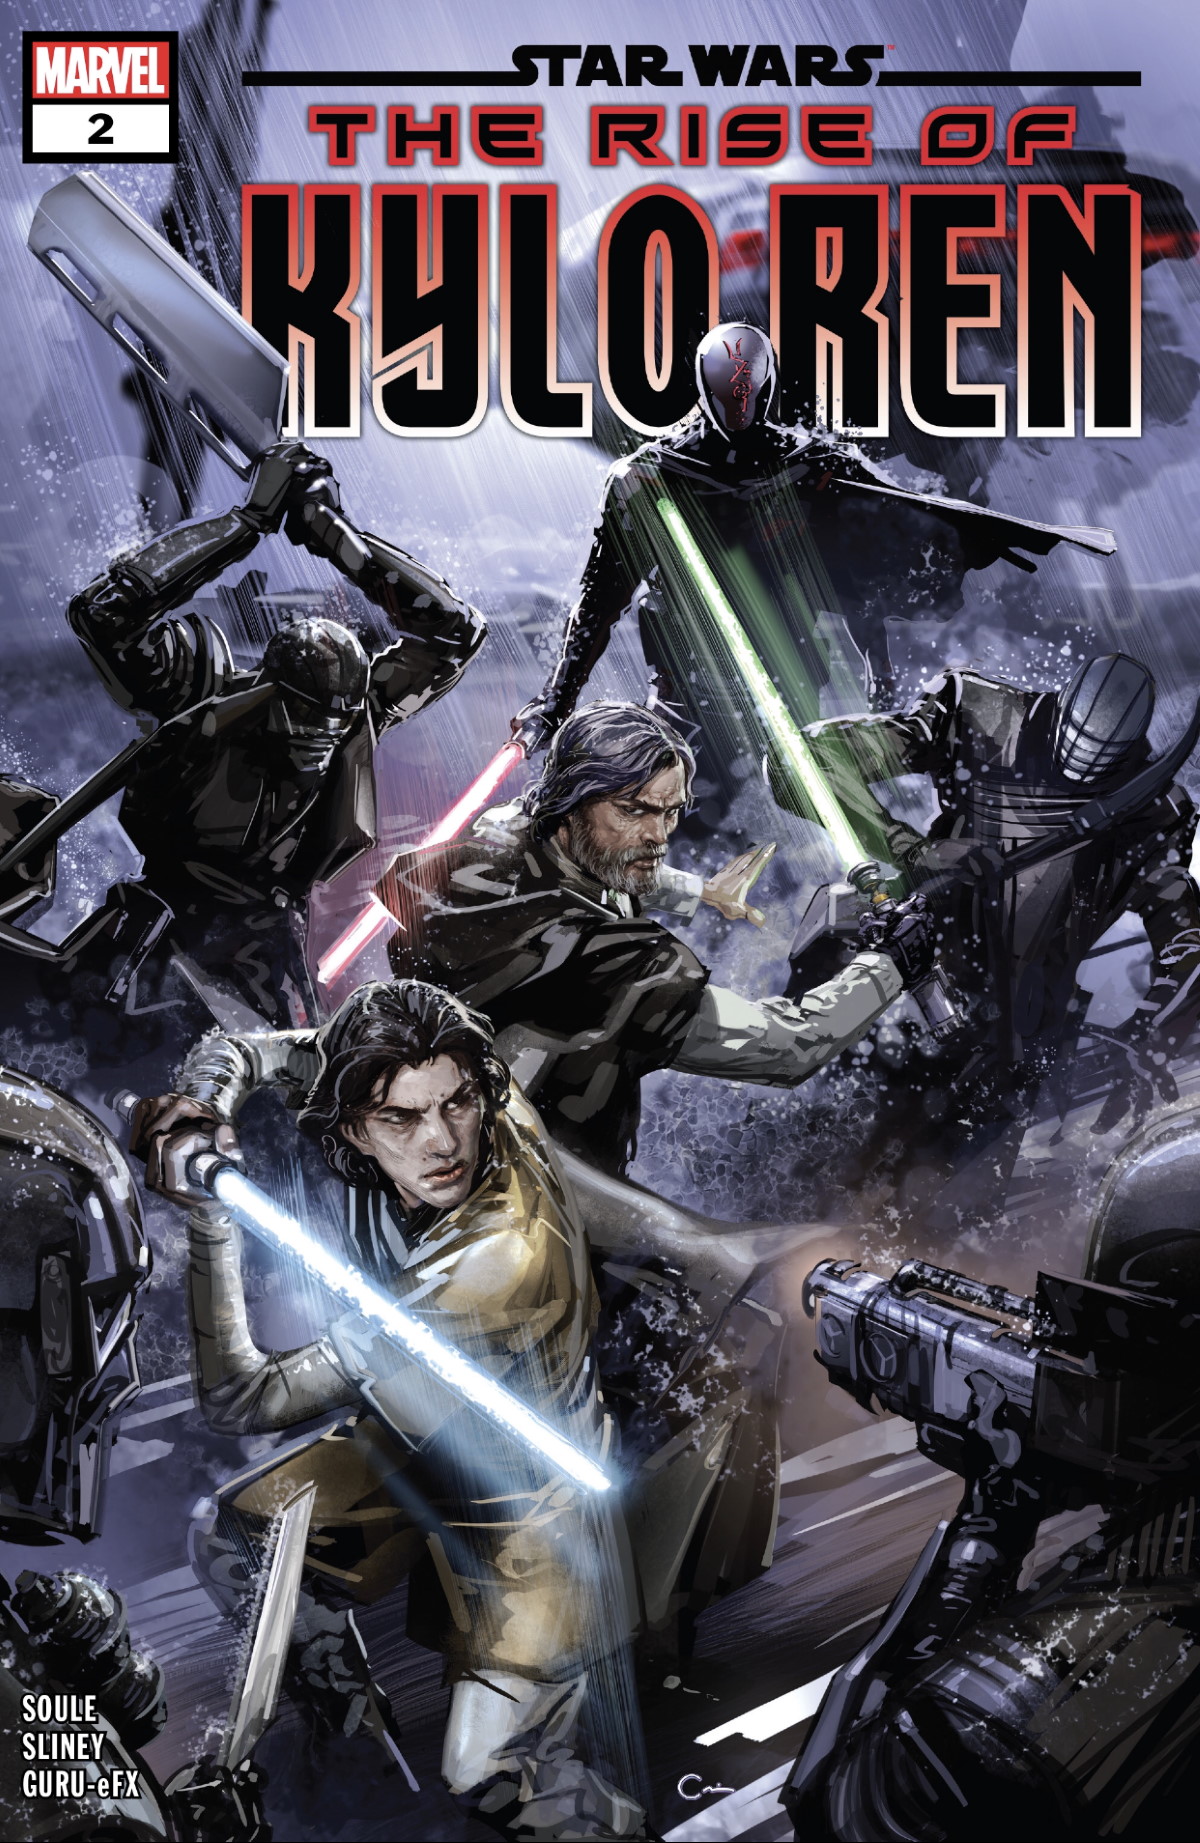 The Rise of Kylo Ren #2 Review - Star Wars Marvel